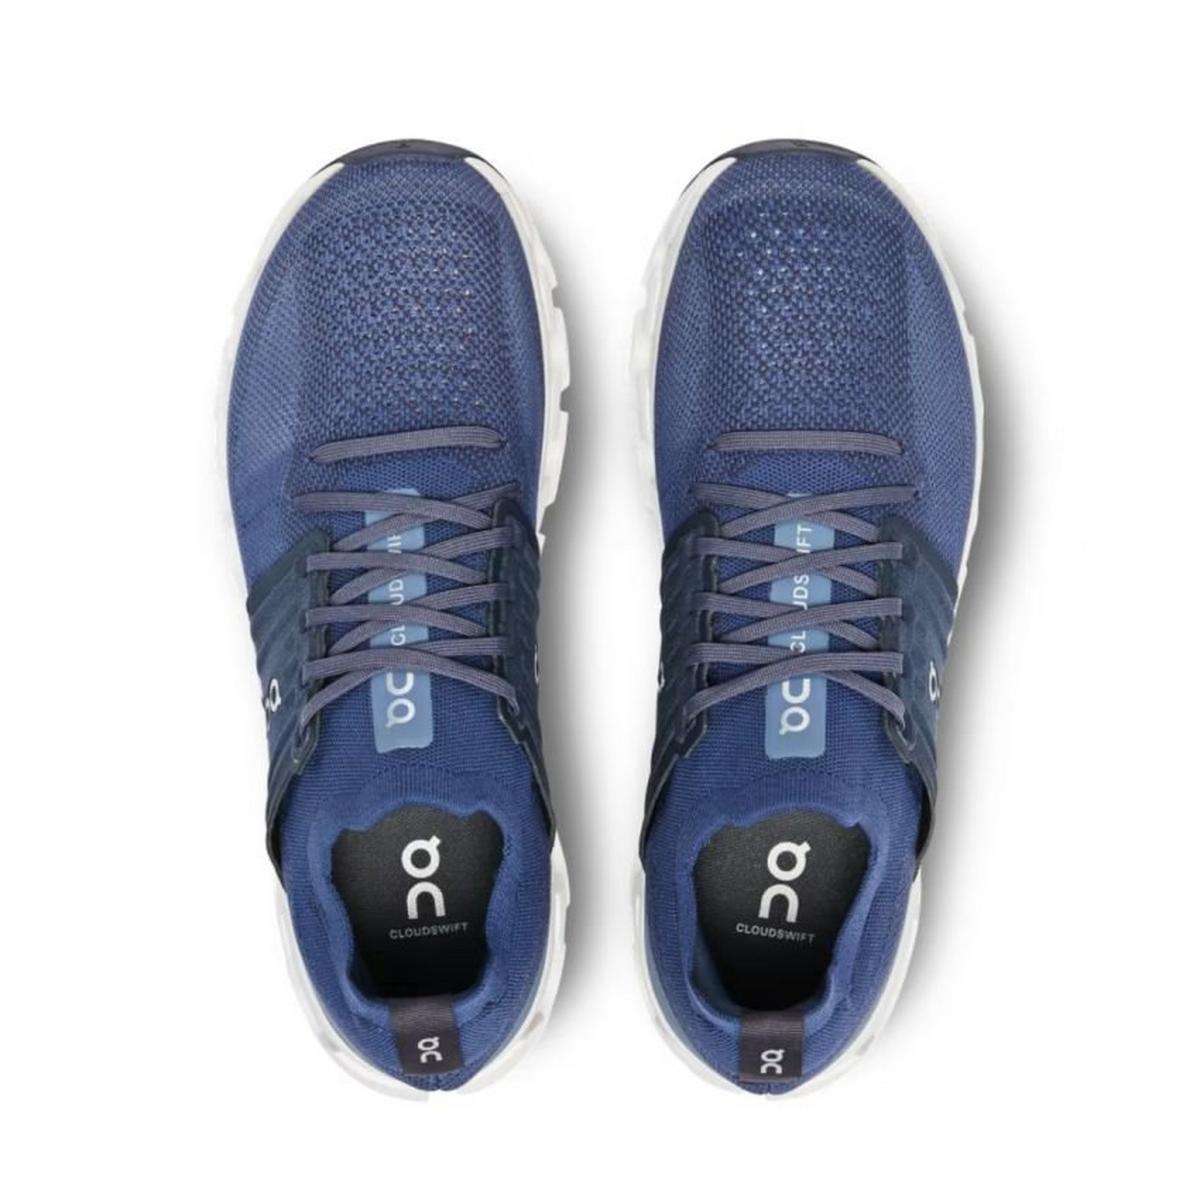 On Men's Cloudswift 3 Running Shoes - Midnight